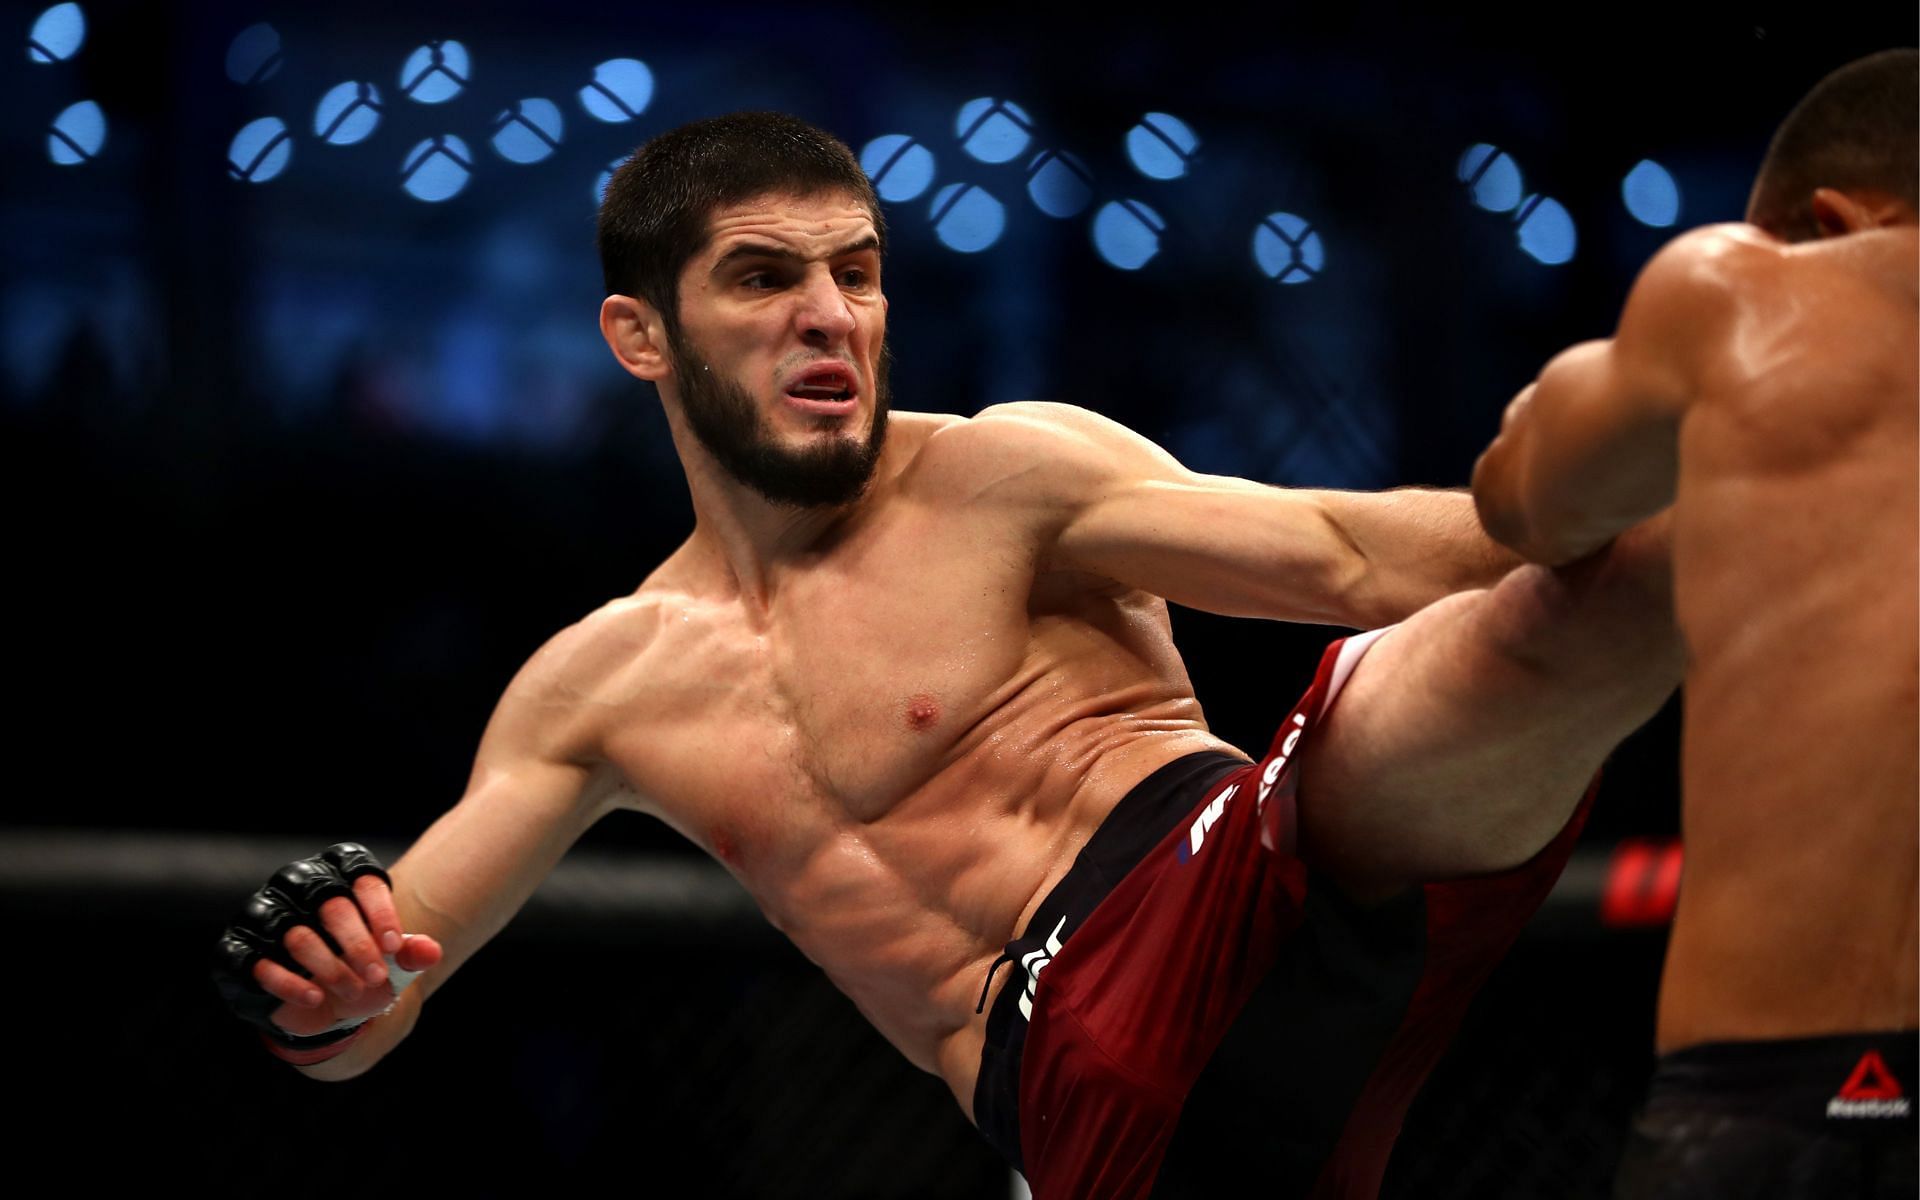 Islam Makhachev during his UFC 242 fight